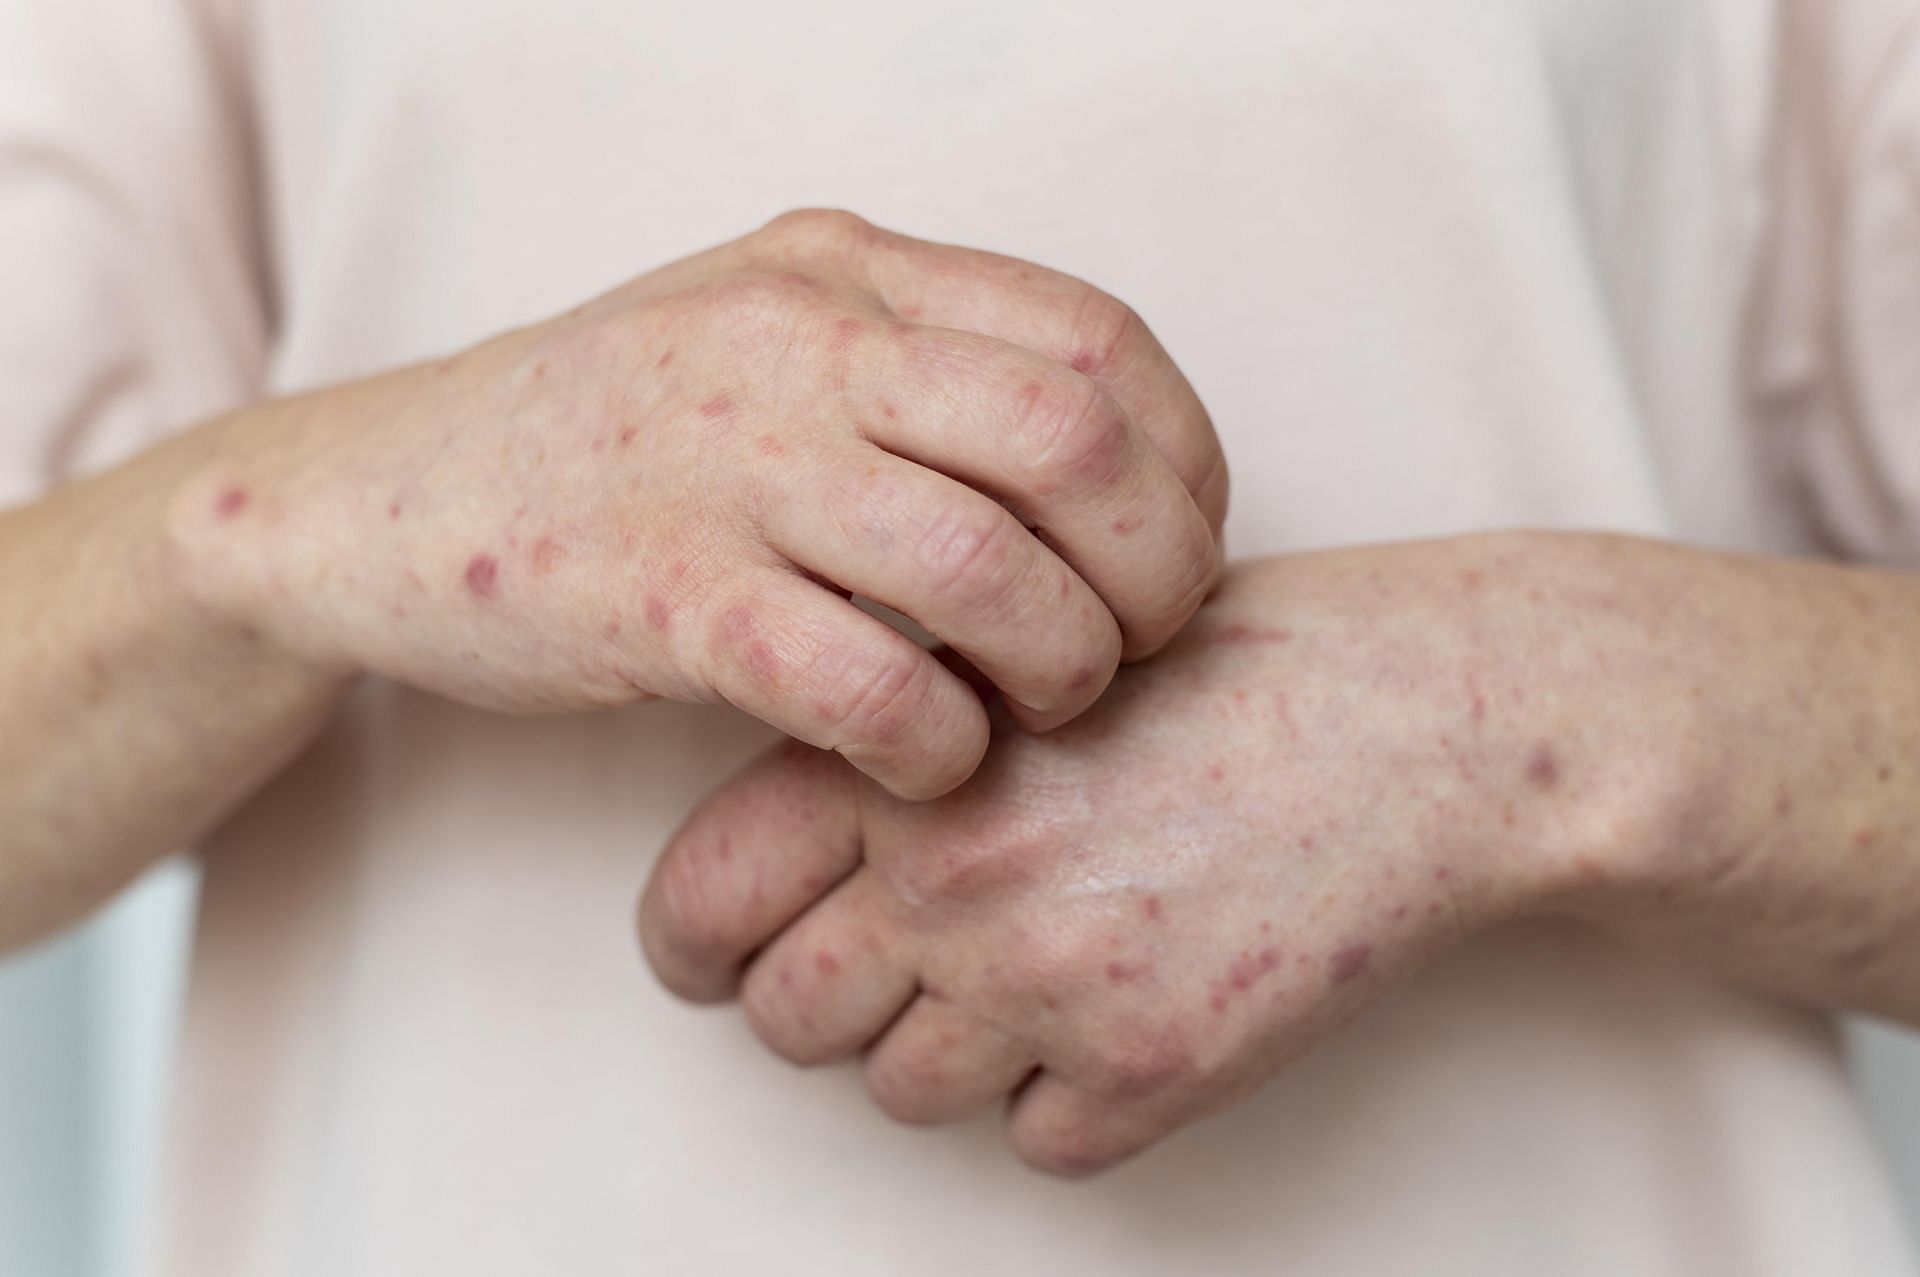 Are you suffering from shingles? (Image by freepik)